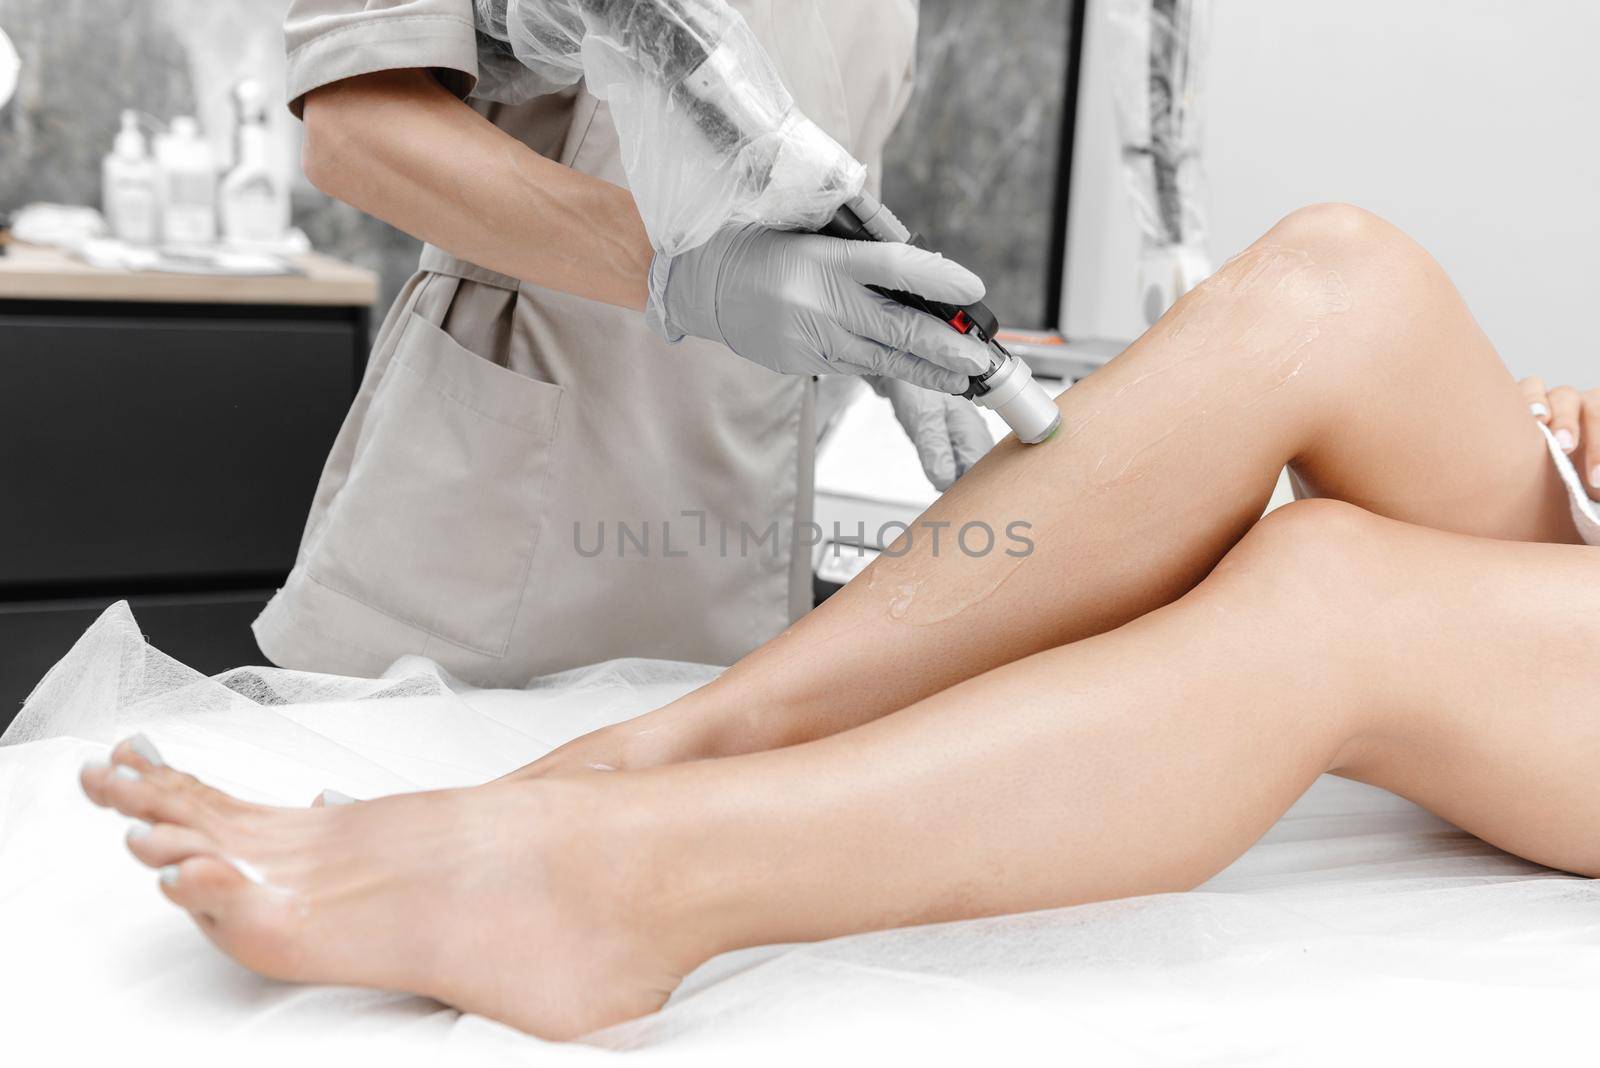 the process of laser hair removal on legs. Beautiful legs without hair. Hair removal on the legs.